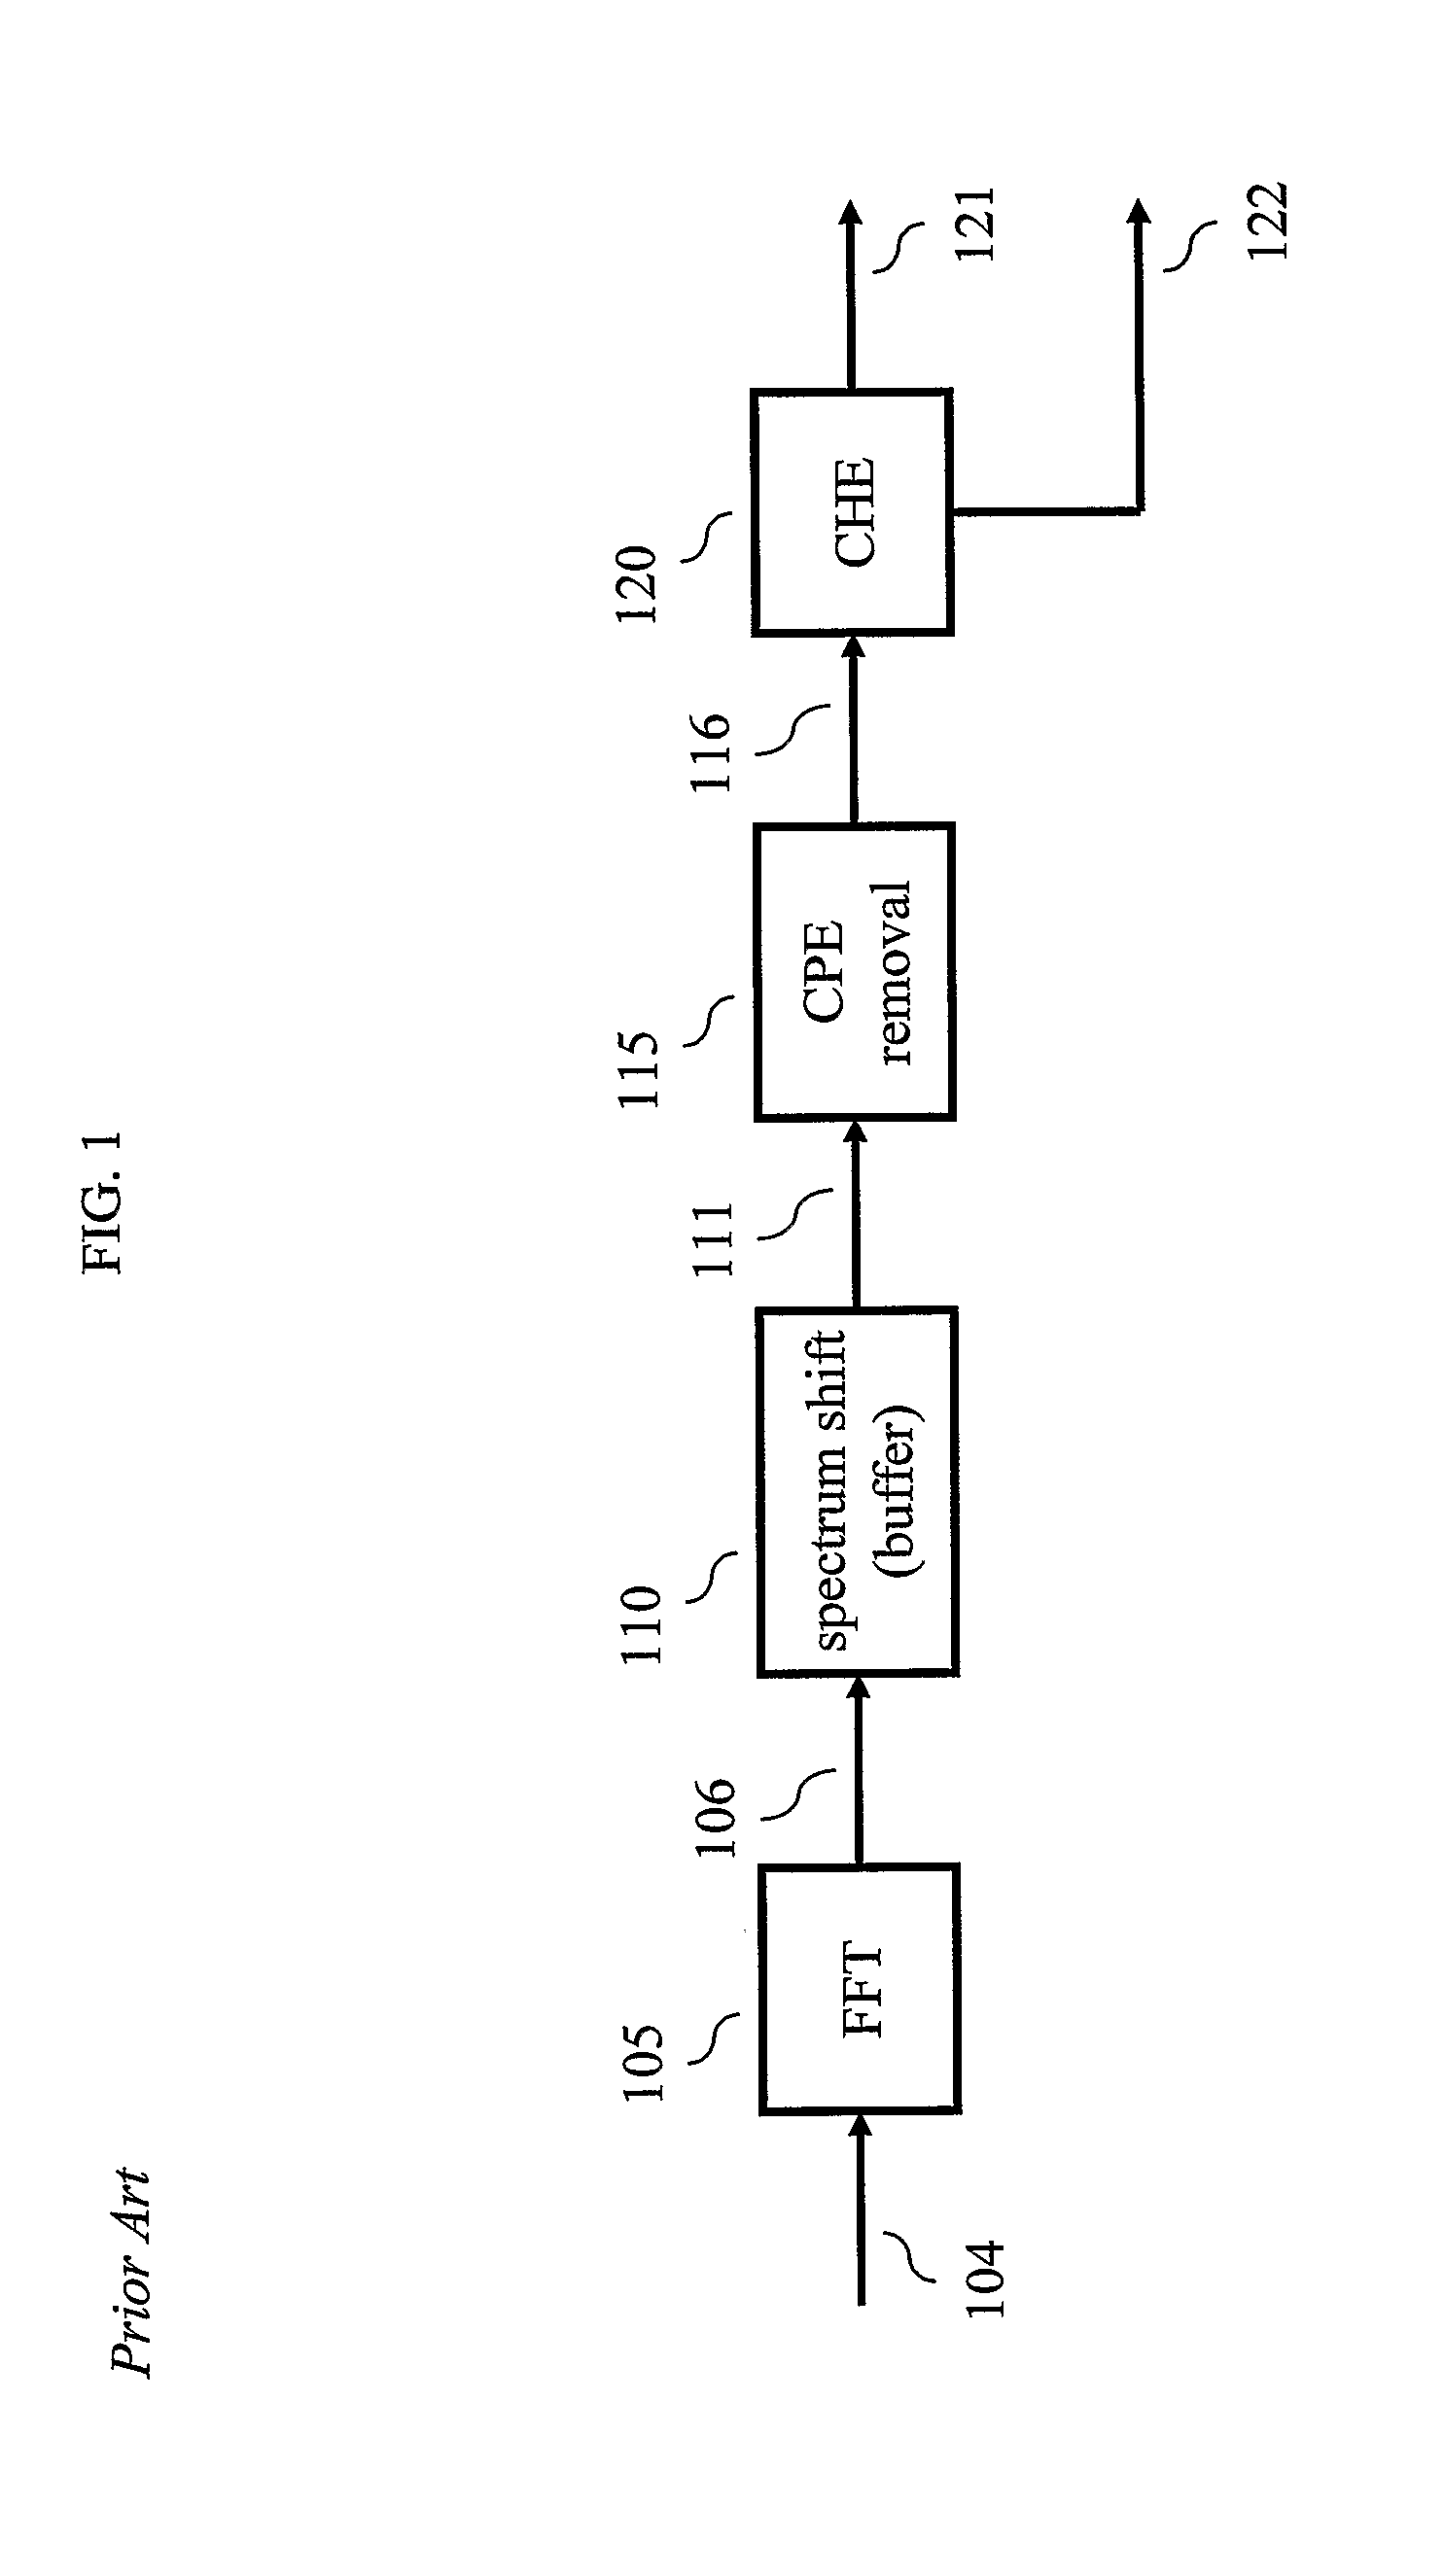 Apparatus and method for removing common phase error in a dvb-t/h receiver